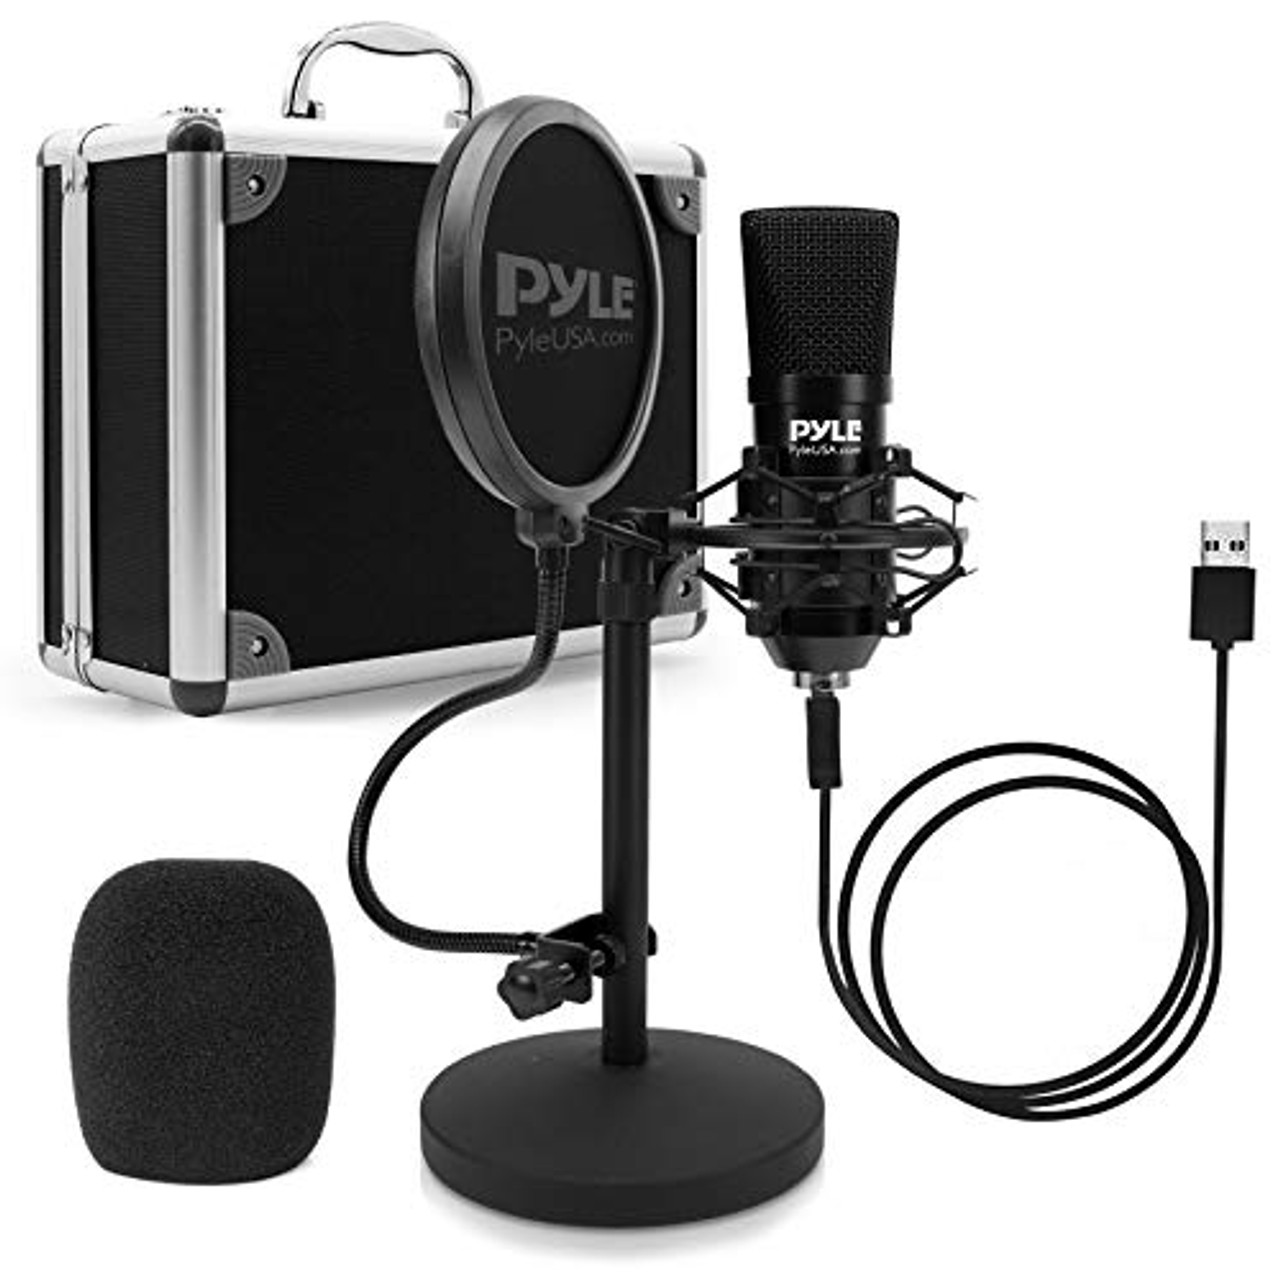 PC Condenser Microphone: Podcasts, Videos, Gaming